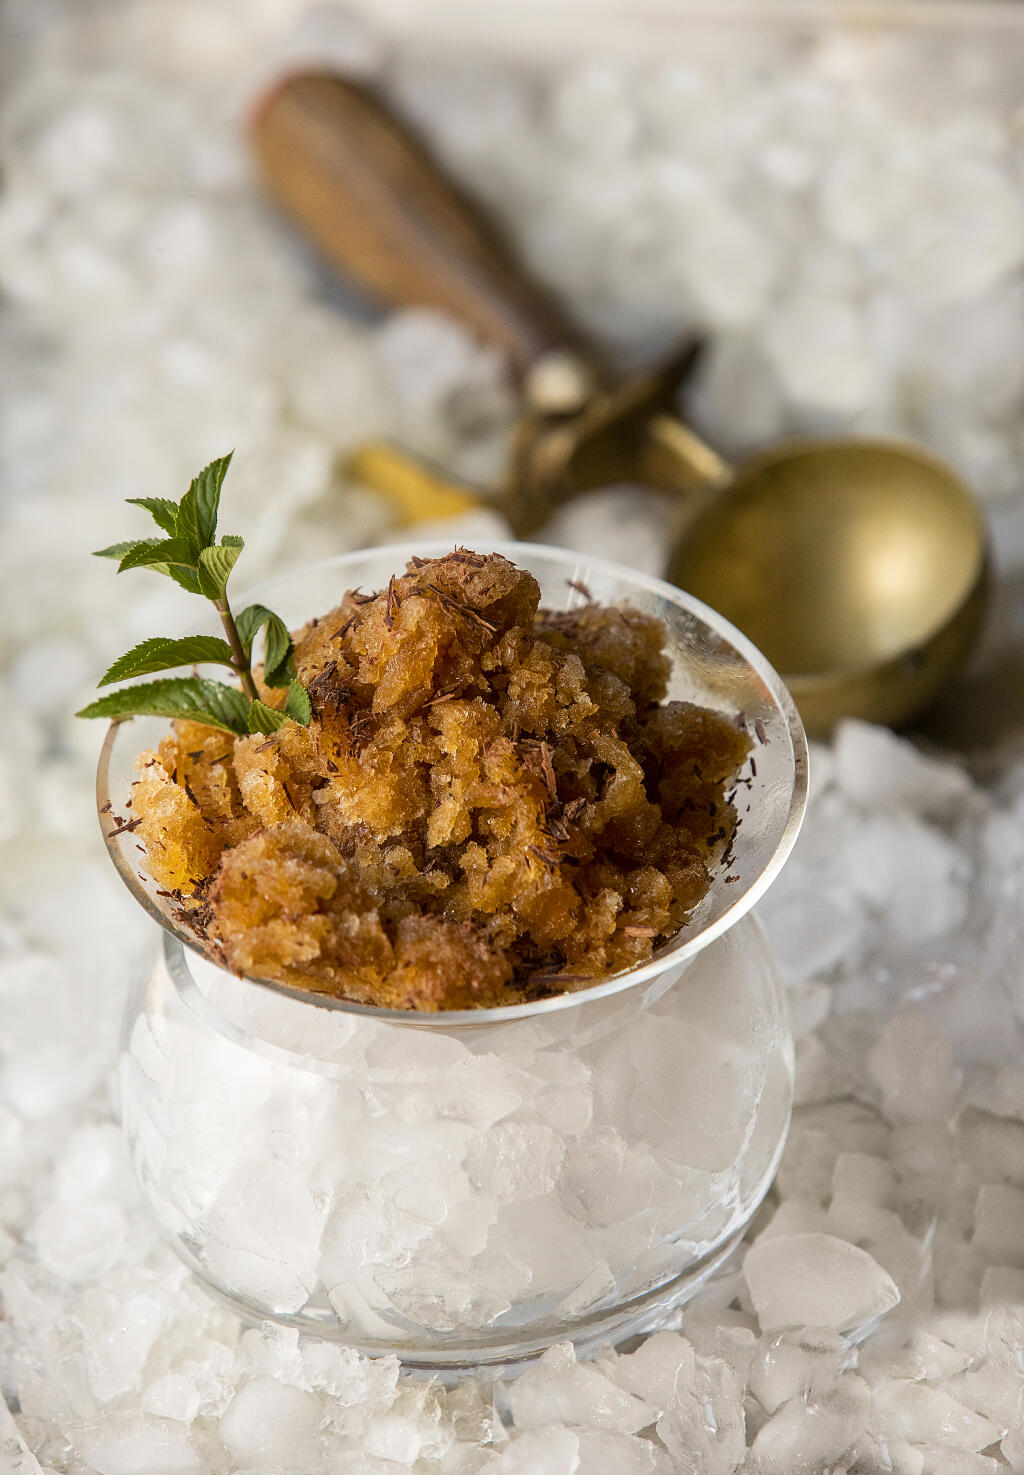 Espresso Granita from chef John Ash. Traditionally, granitas are made by repeatedly stirring and scraping the mixture as it freezes and harden. (John Burgess/The Press Democrat)